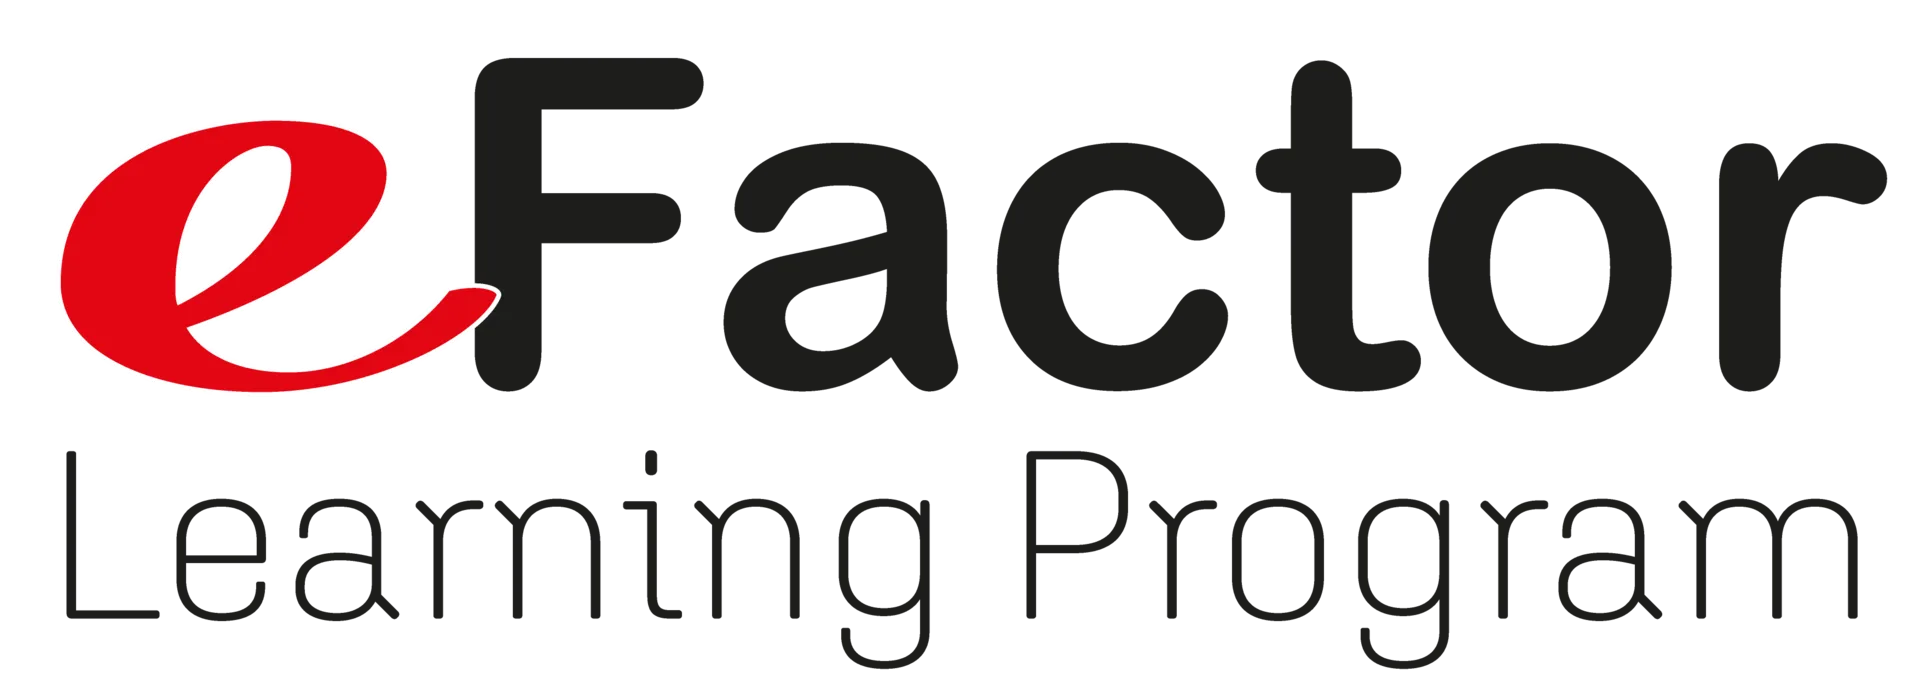 eFactor Learning